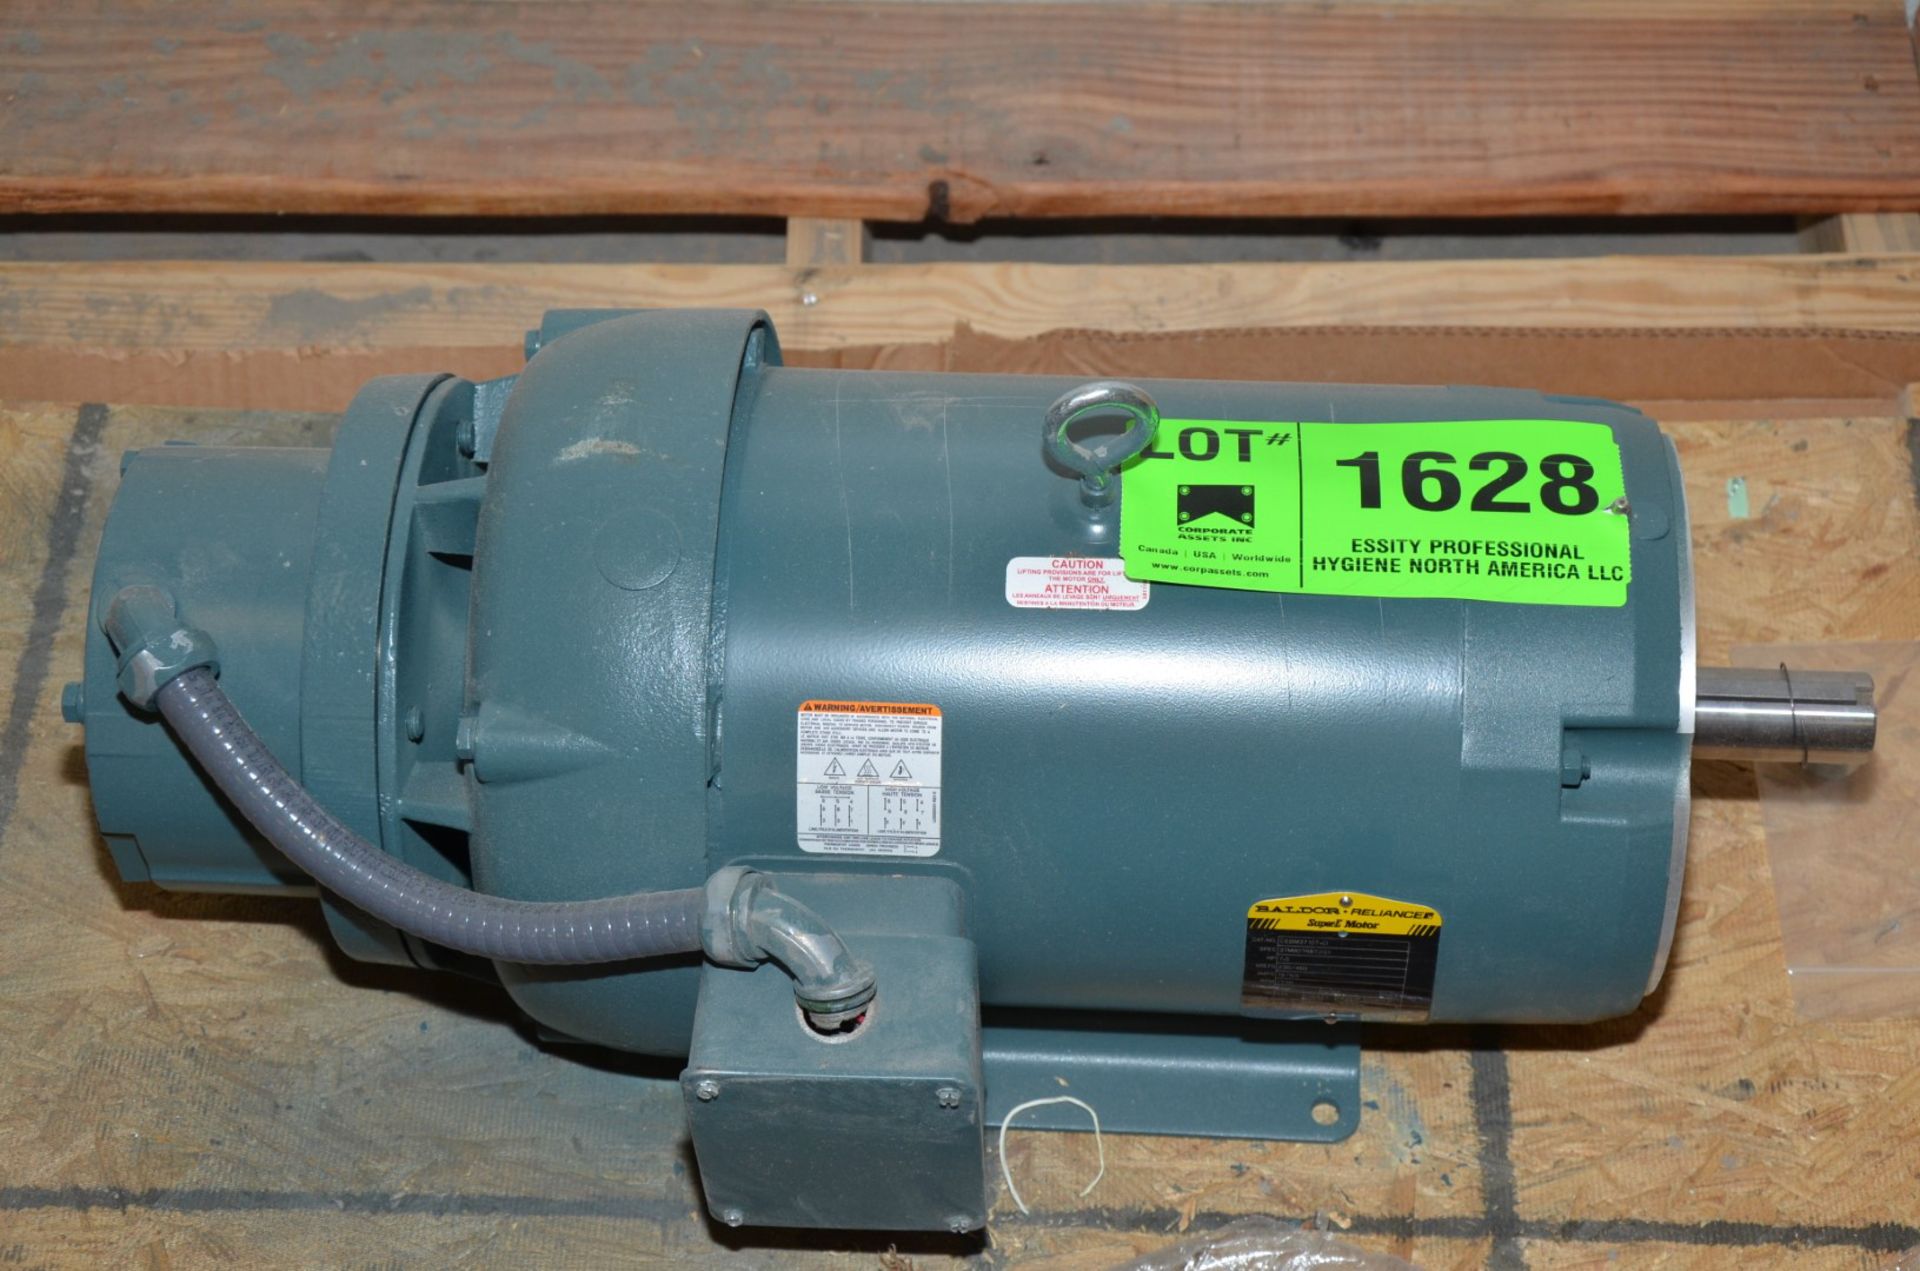 BALDOR 7.5 HP 1770 RPM ELECTRIC MOTOR [RIGGING FEE FOR LOT #1628 - $25 USD PLUS APPLICABLE TAXES]